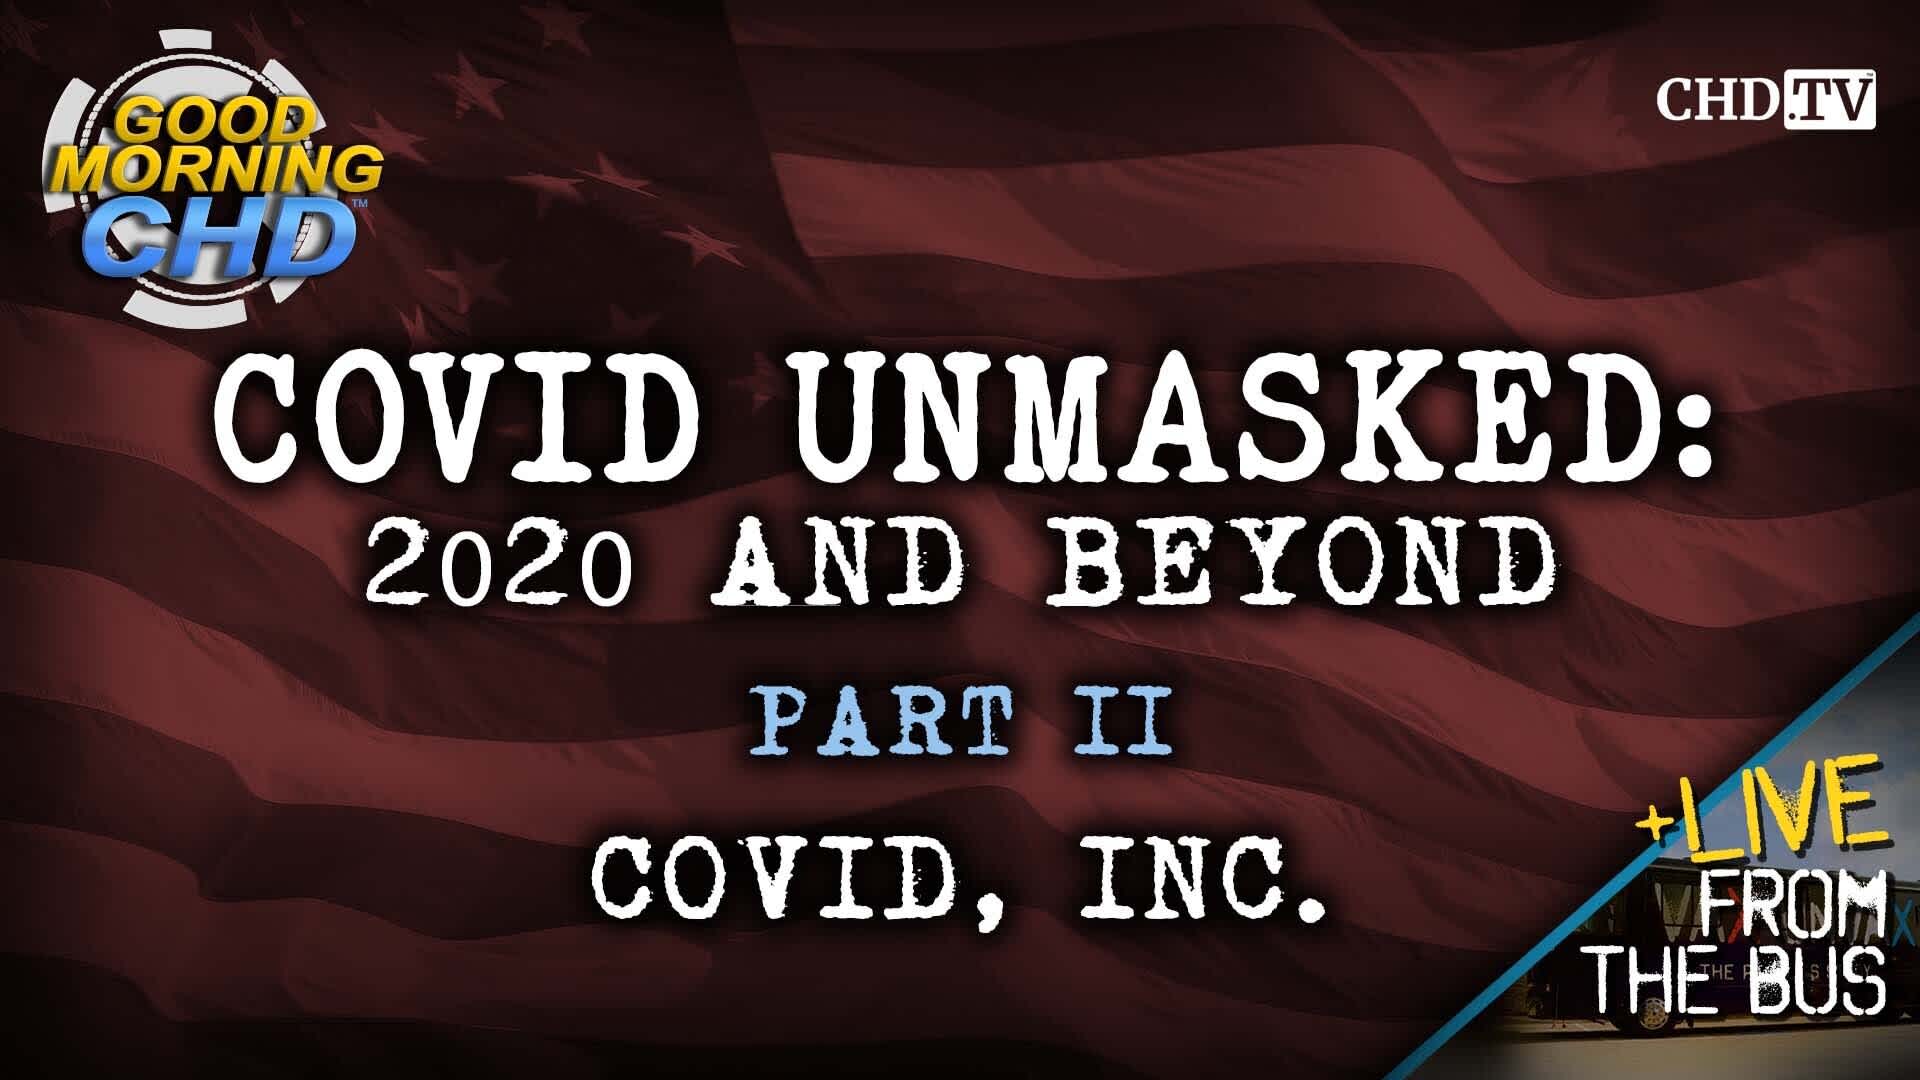 COVID UNMASKED PART 2: COVID, INC.